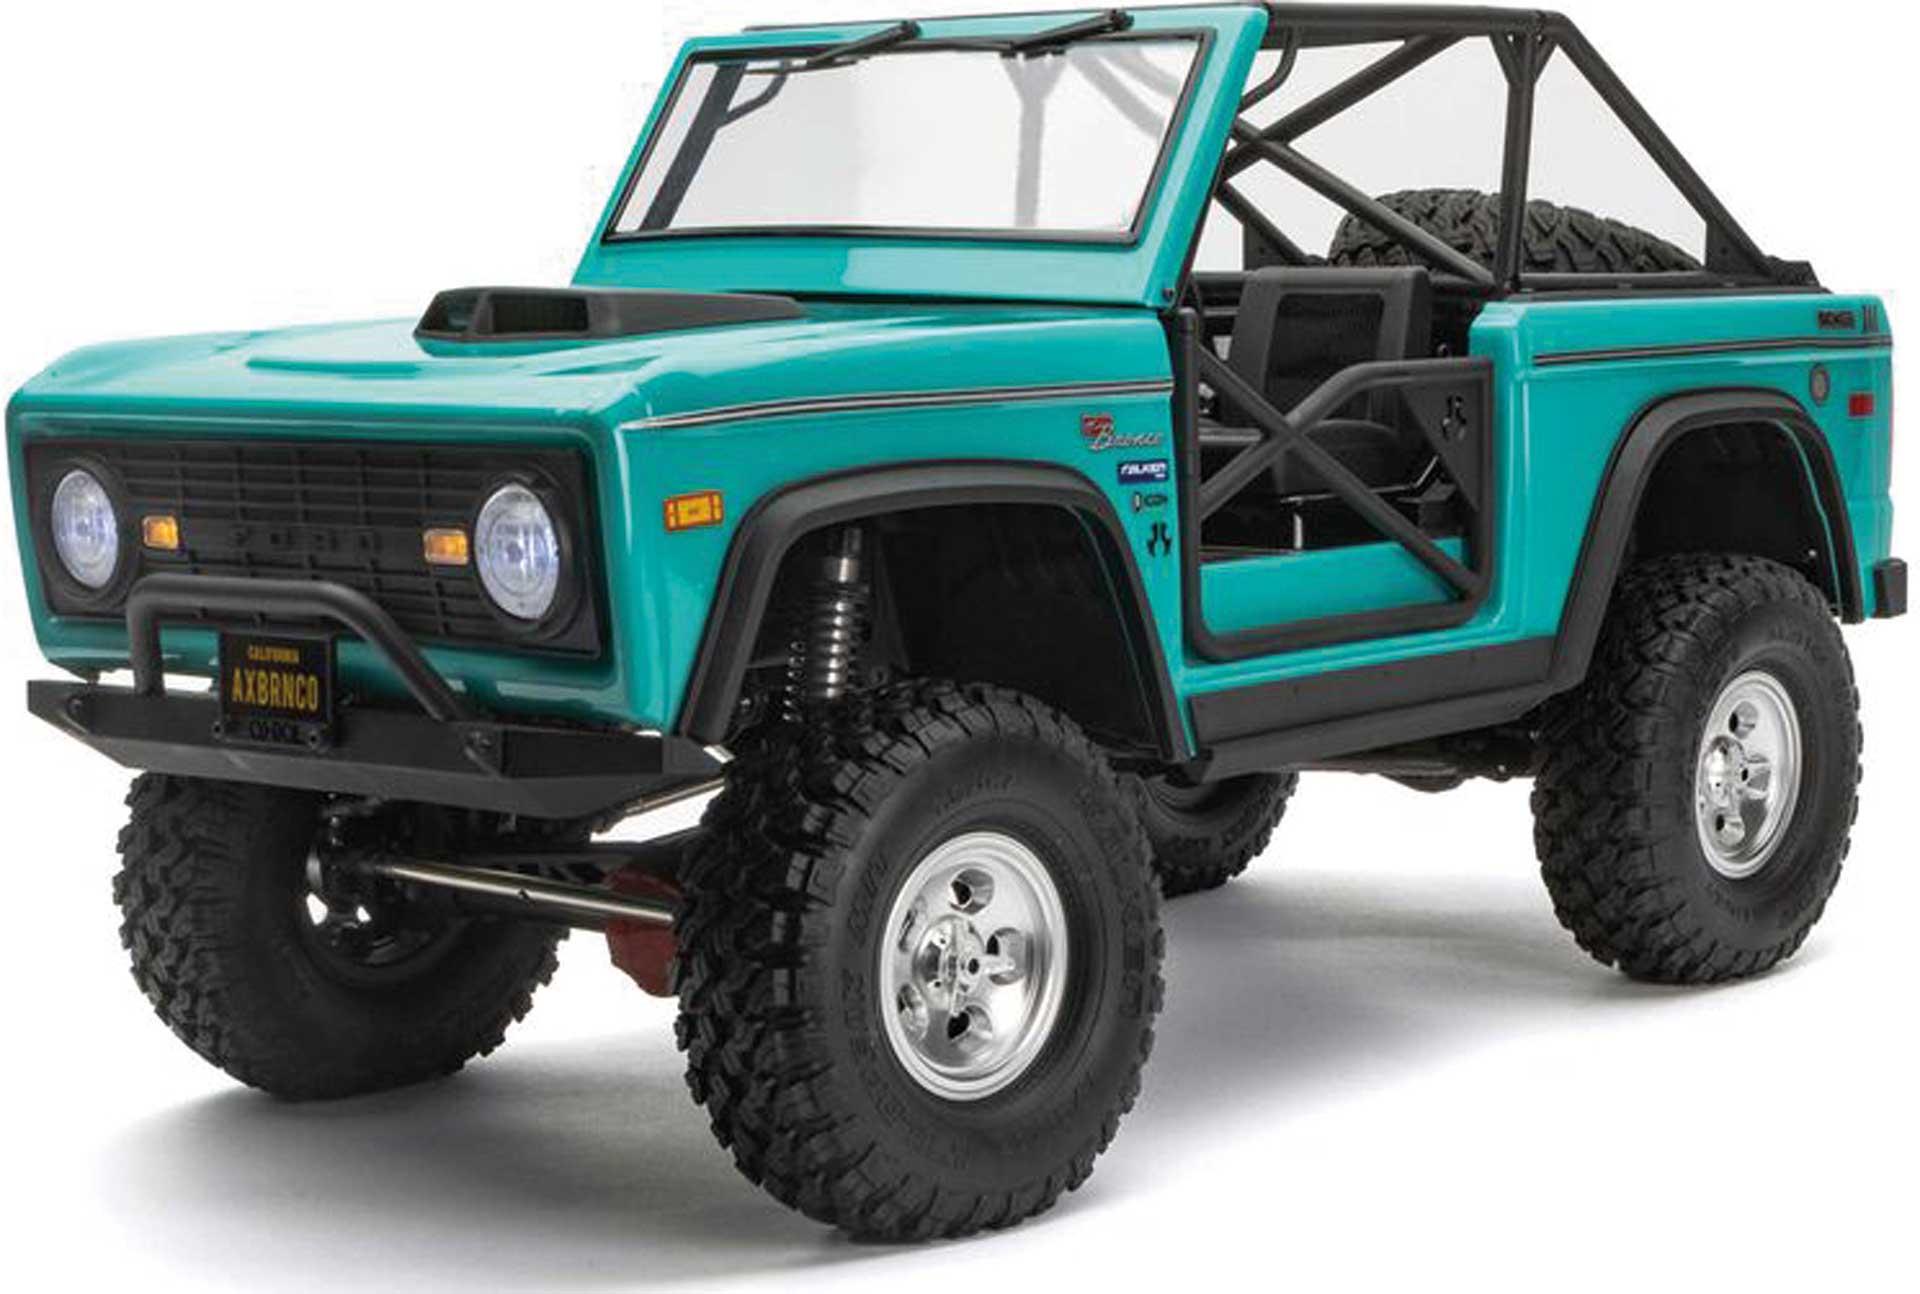 Axial - SCX10 III Early Ford Bronco 1:10th 4wd RTR (Teal)